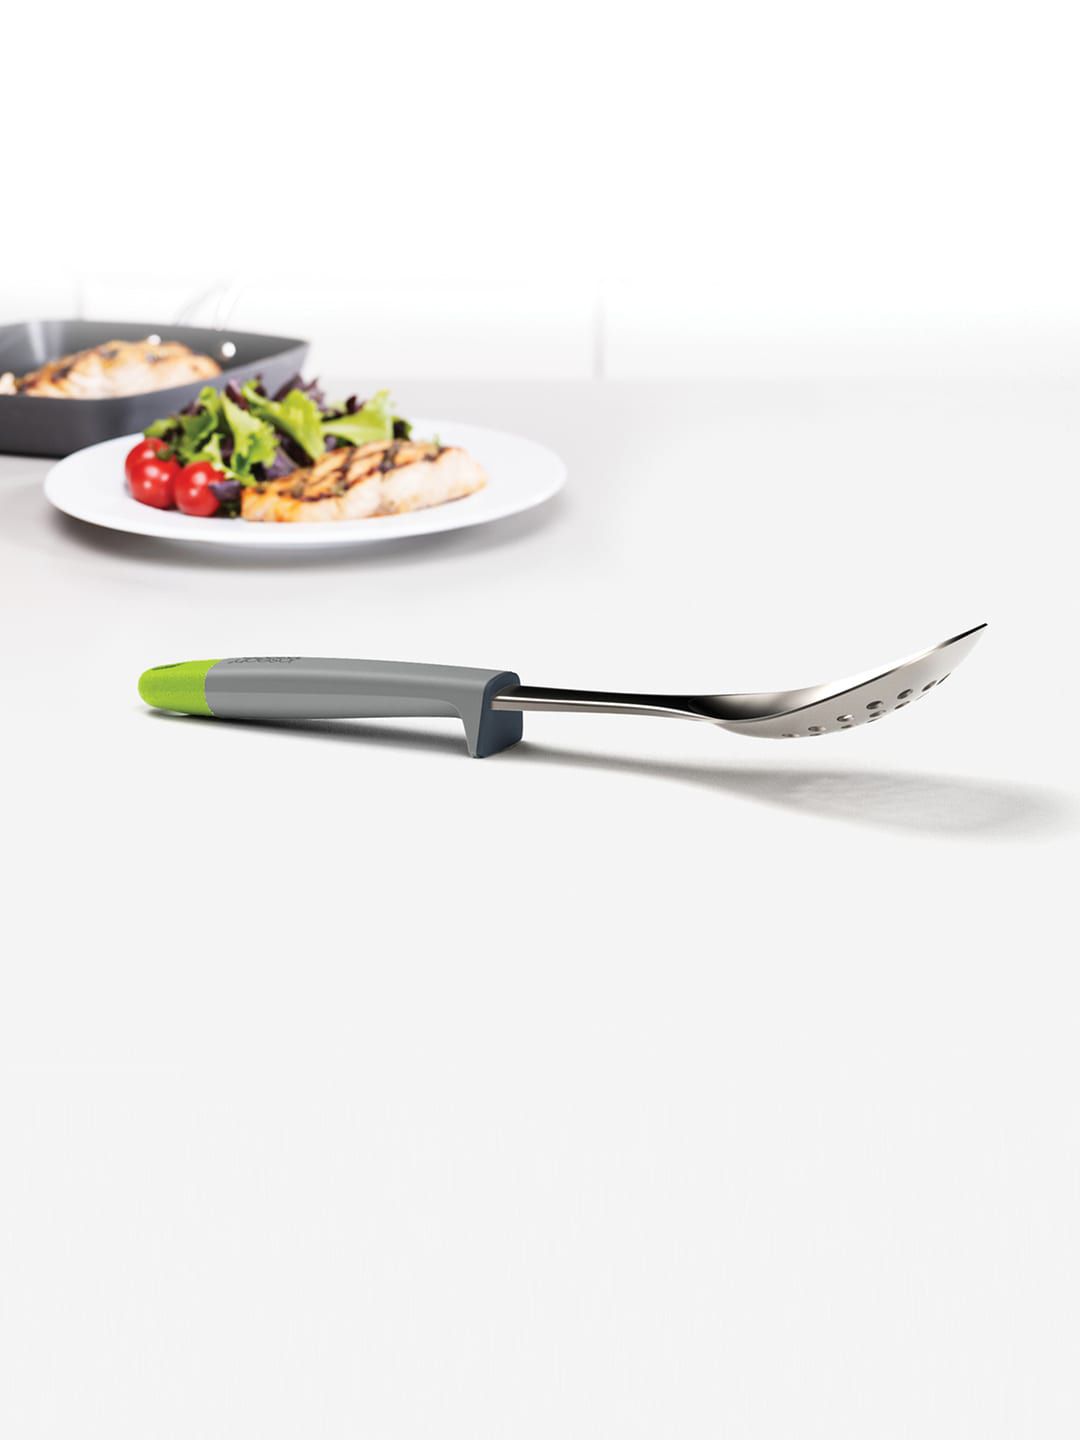 Joseph Joseph Grey & Green Stainless Slotted Spoon Steel Spatula Price in India